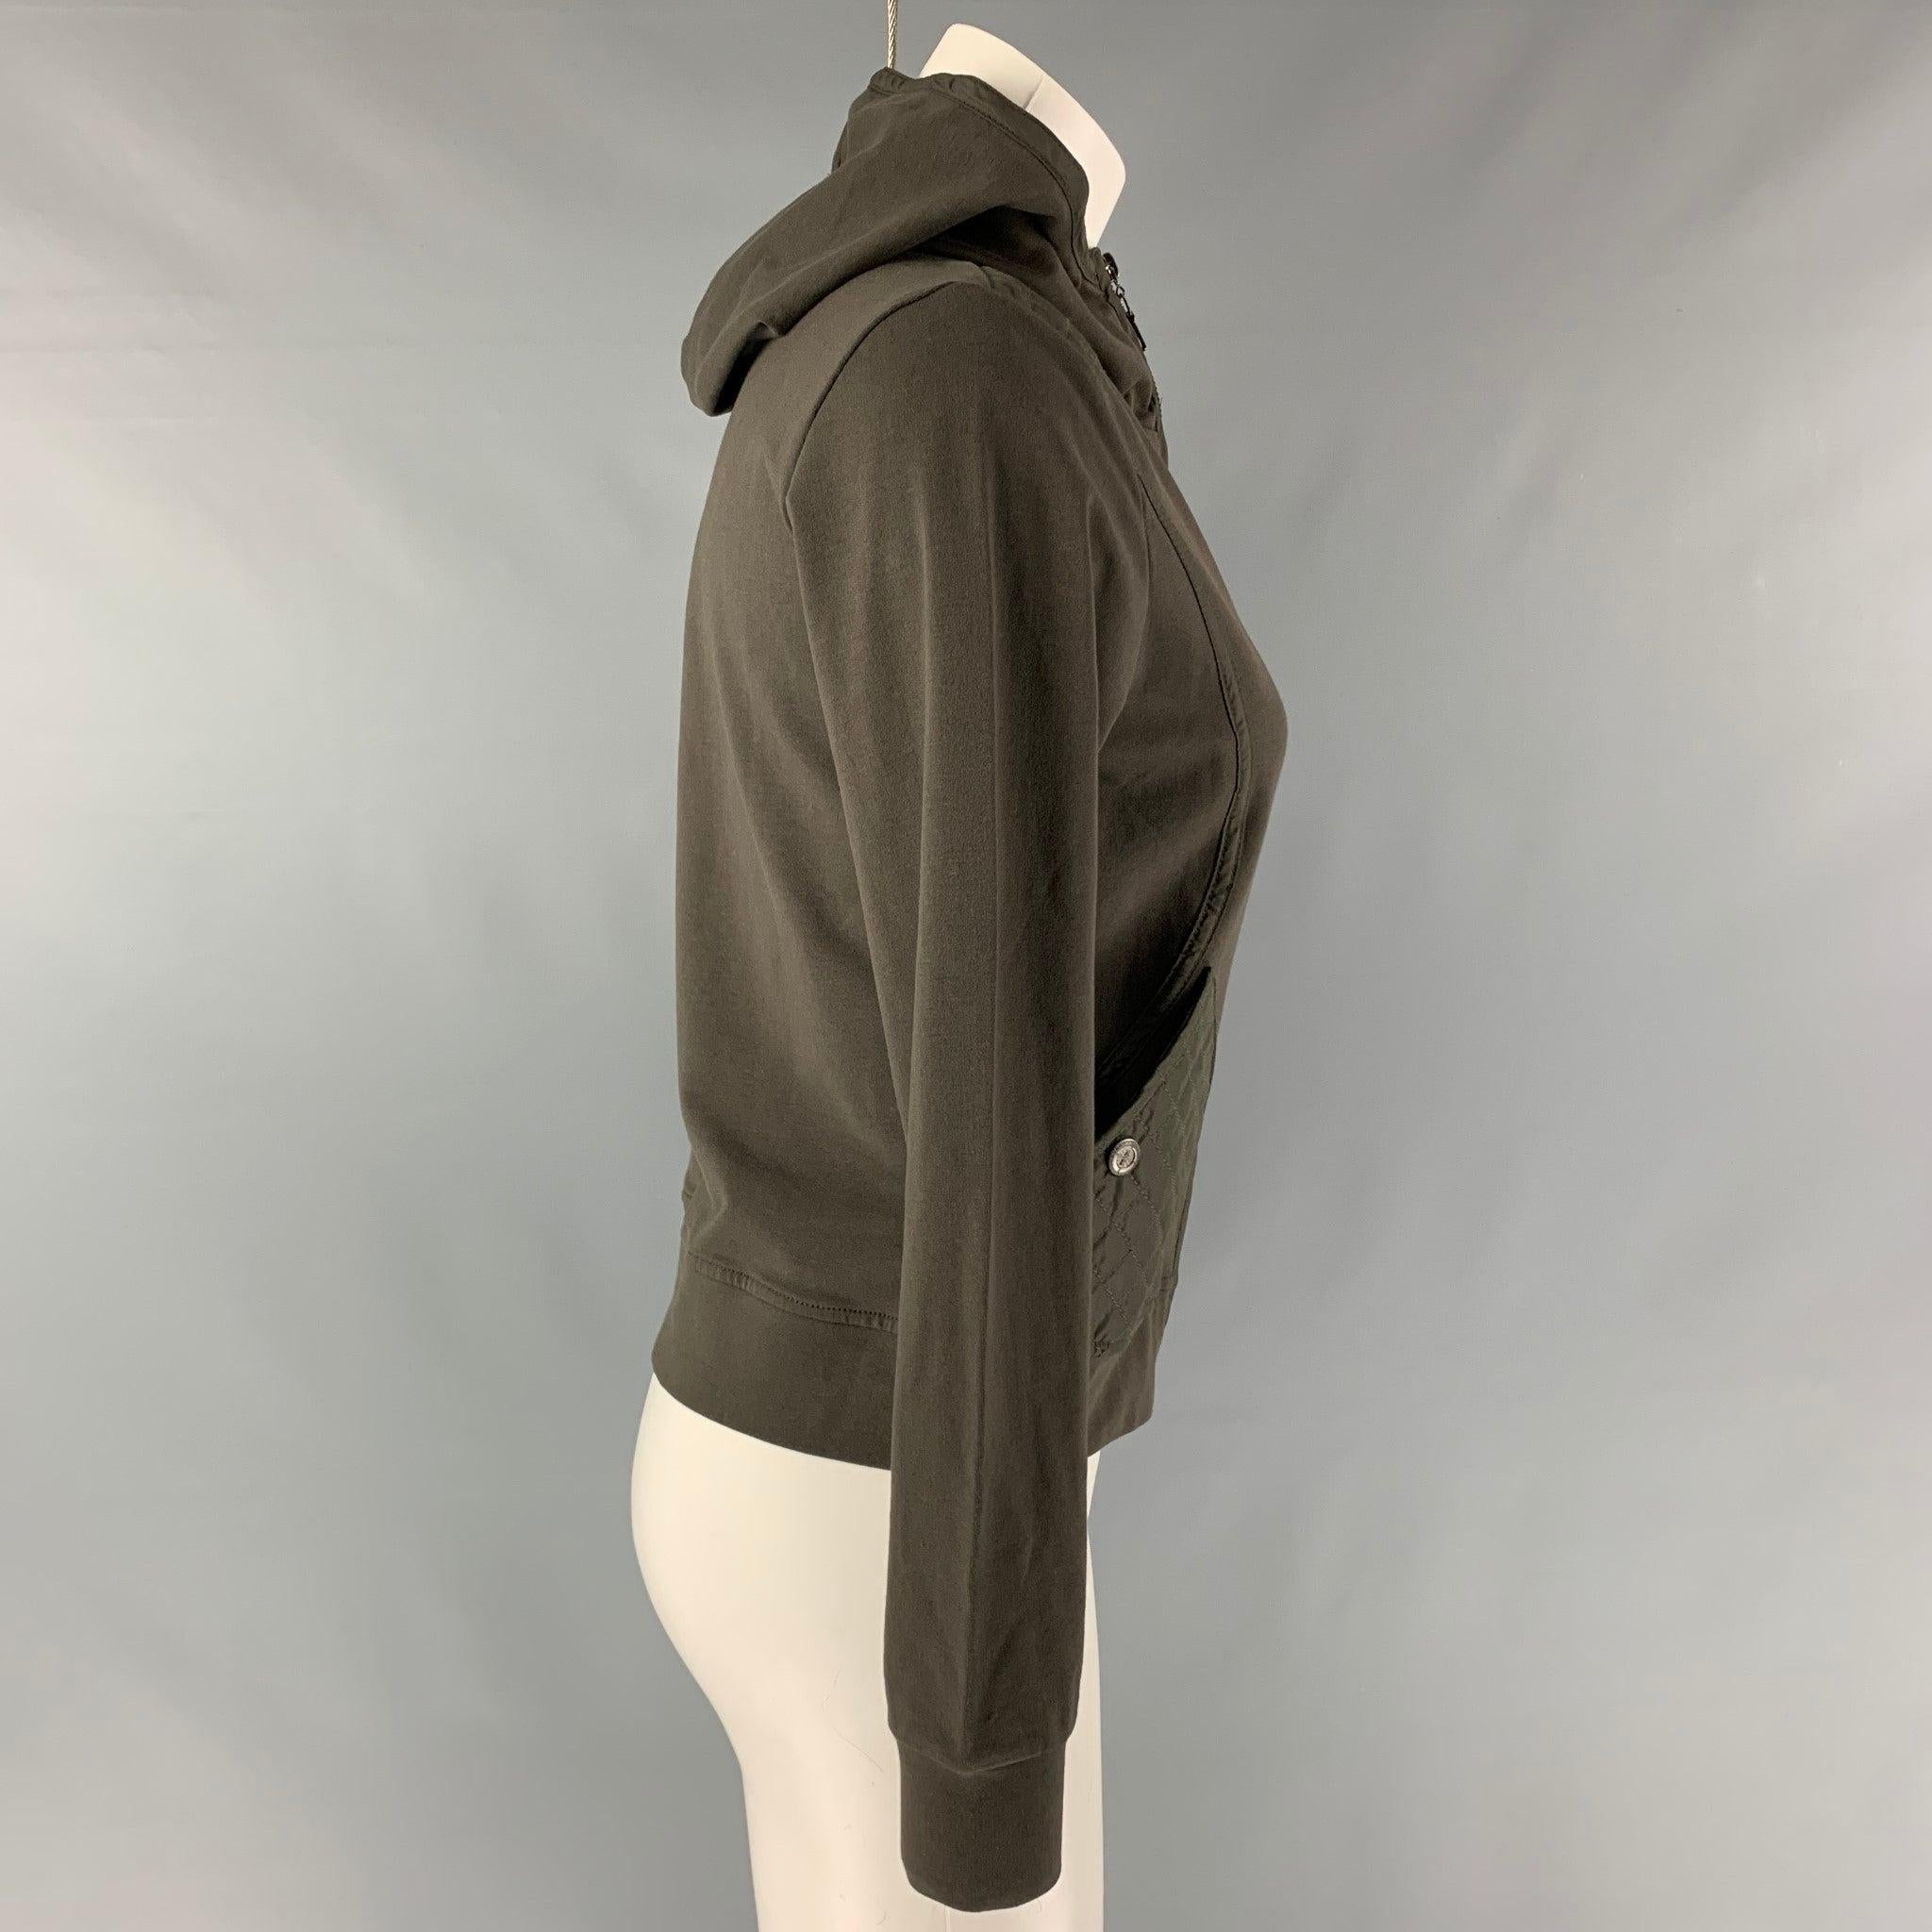 PRADA SPORT casual long sleeve top comes in a olive french terry knit fabric featuring a zip up closure, quilted details and a hoodie.Good Pre-Owned Condition. Moderate signs of wear and moderate marks. As Is. 
 

 Marked:  L 
 

 Measurements: 
  
